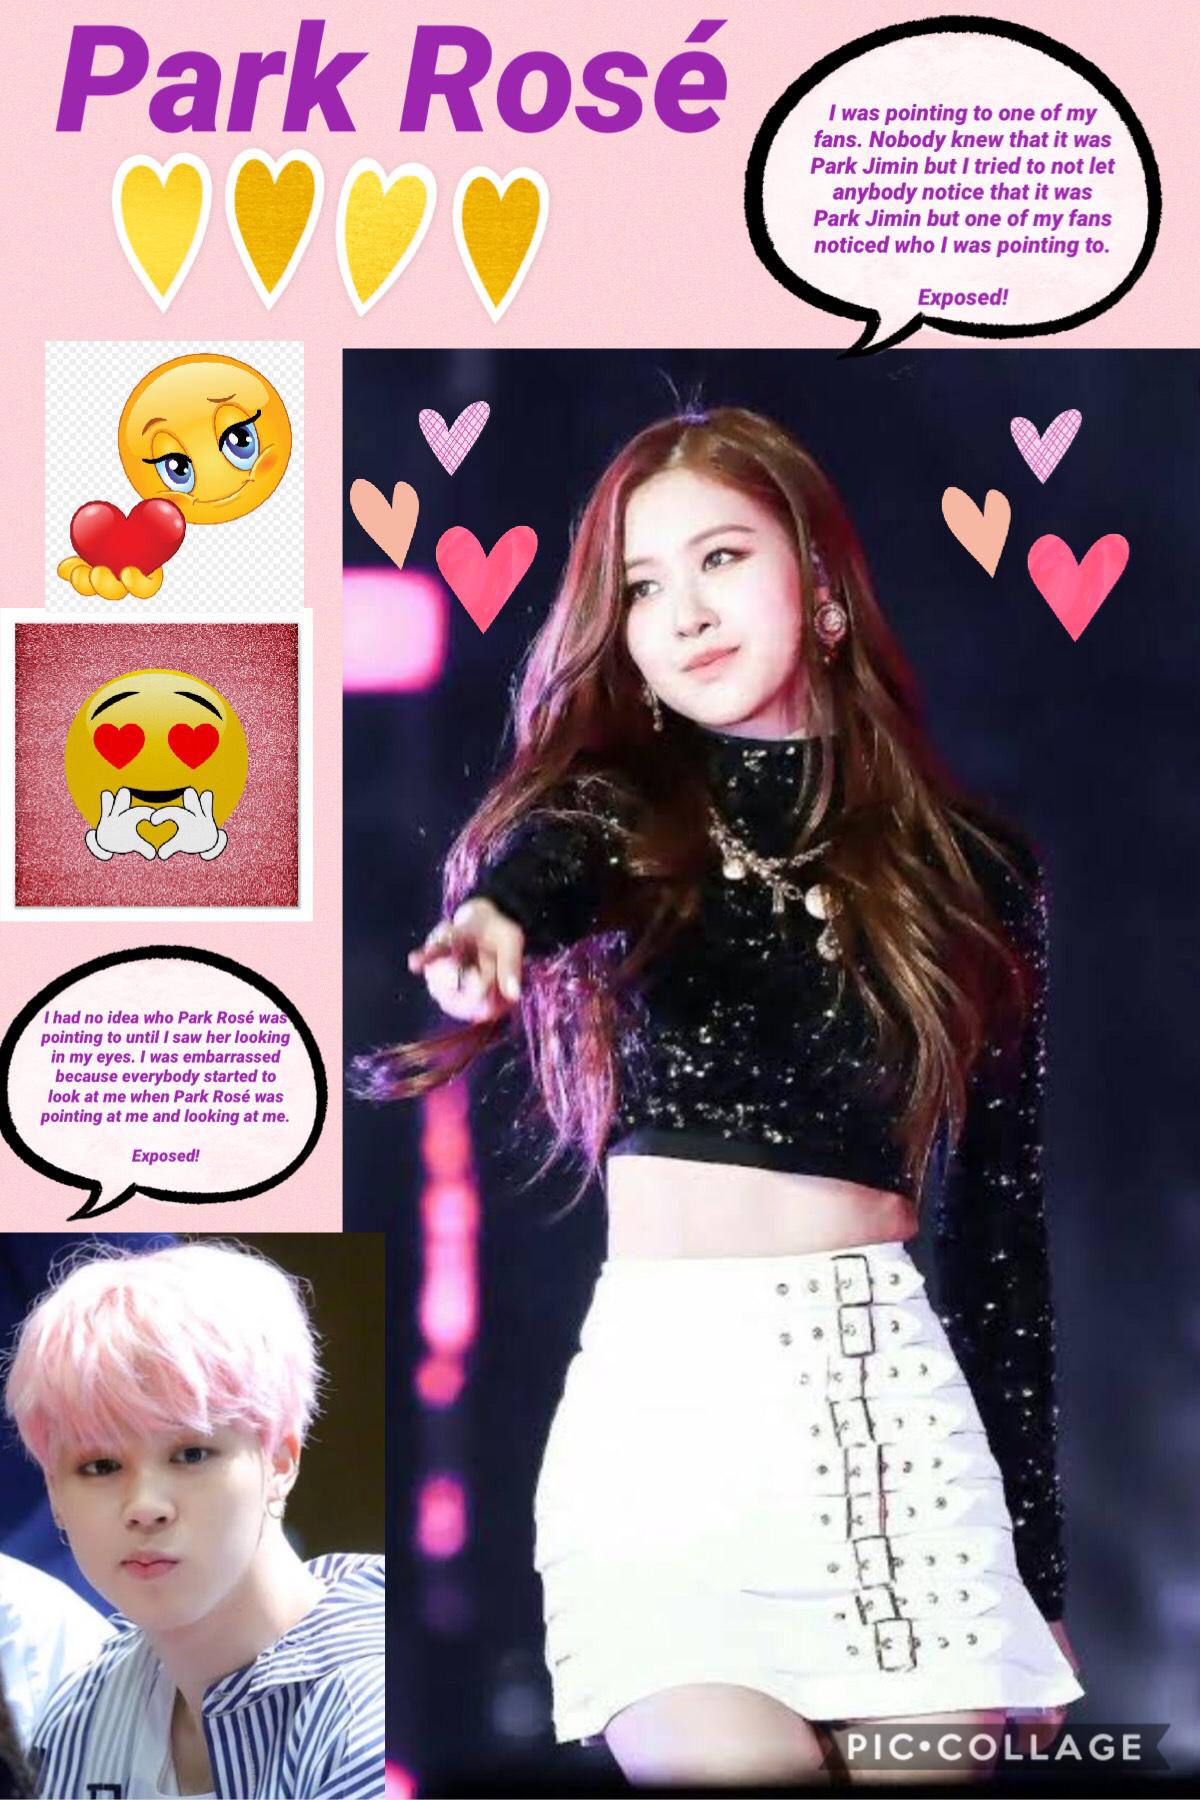 Total love from Park Rosé to Park Jimin. Comment: Park Rosé+Park Jimin= Love. If u comment that I will follow u.